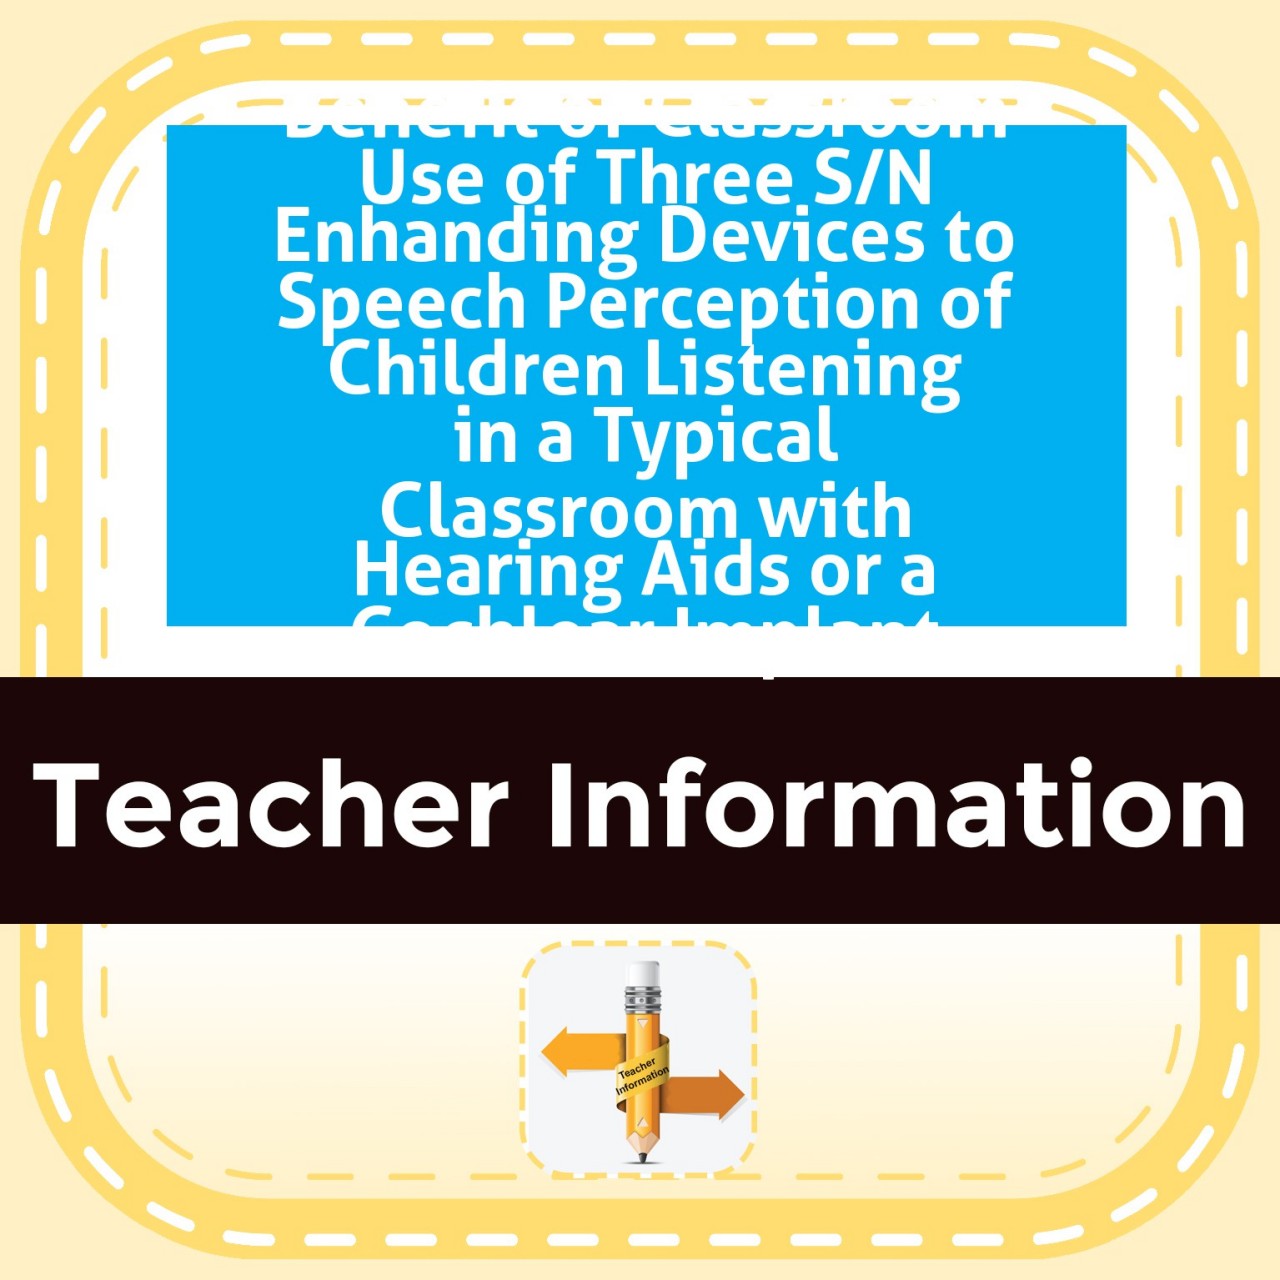 Article Summary: Benefit of Classroom Use of Three S/N Enhanding Devices to Speech Perception of Children Listening in a Typical Classroom with Hearing Aids or a Cochlear Implant